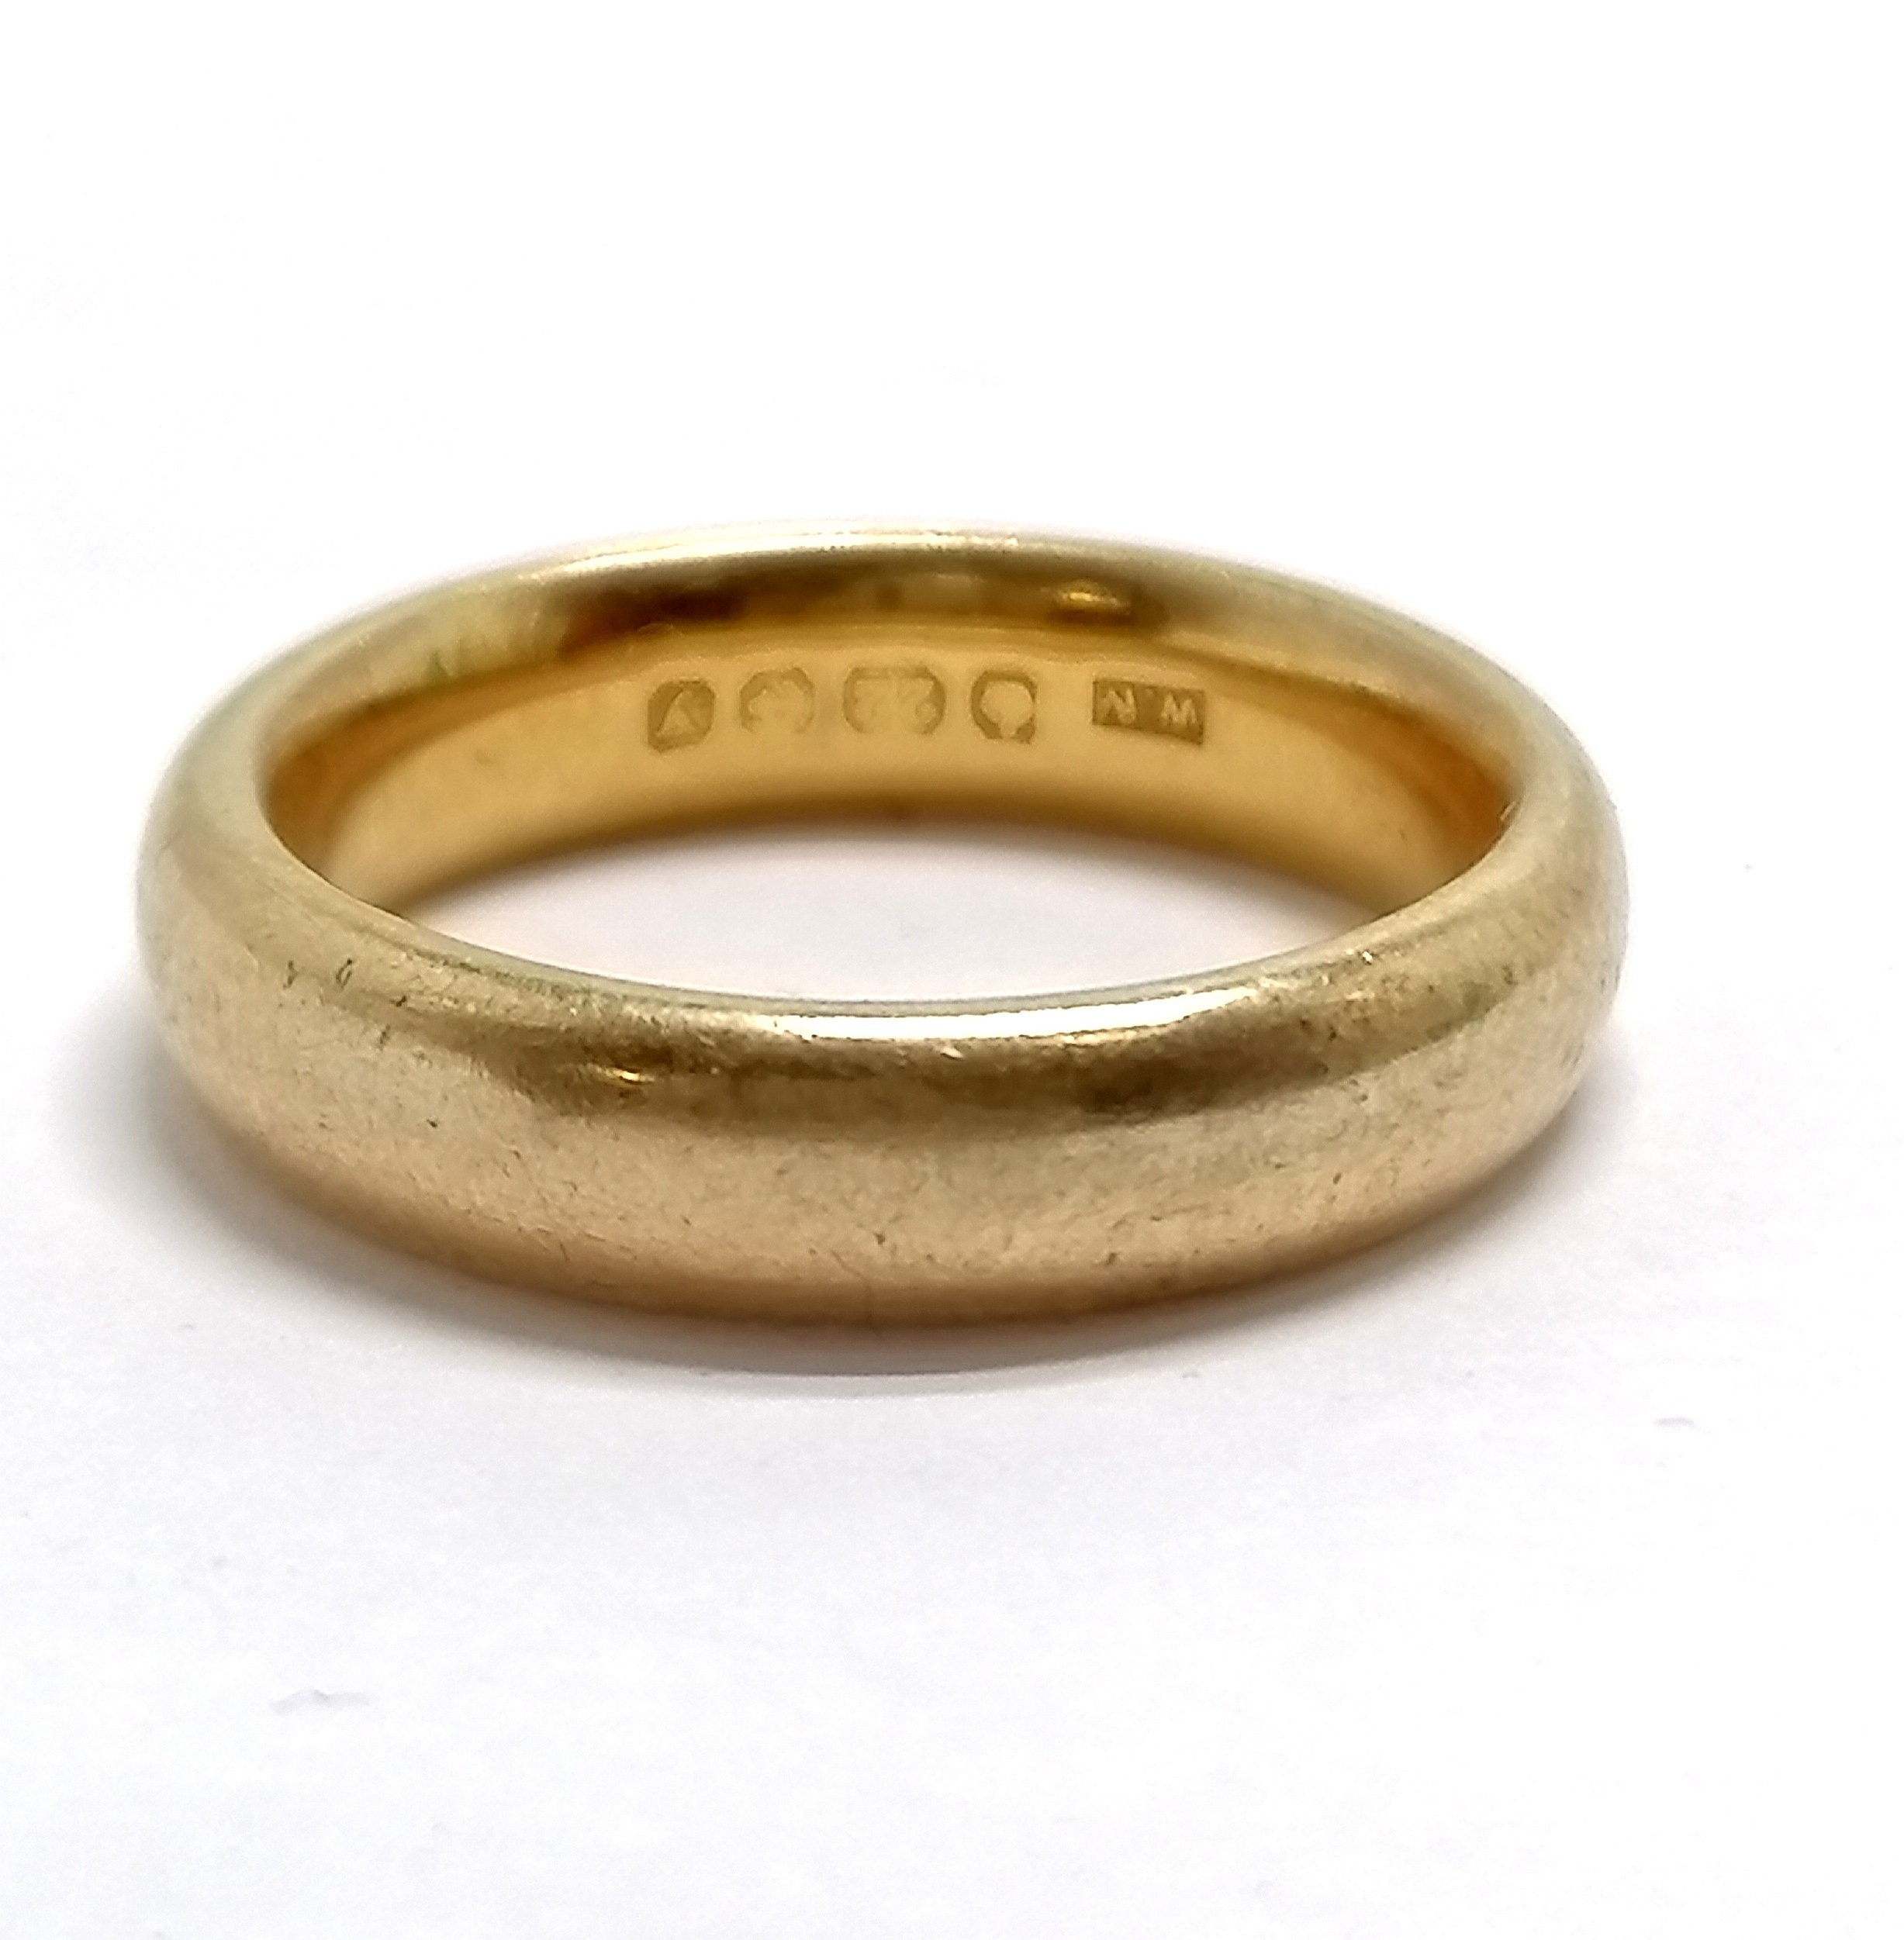 Antique 22ct hallmarked gold band ring - size L & 8.6g ~ 4.5mm wide